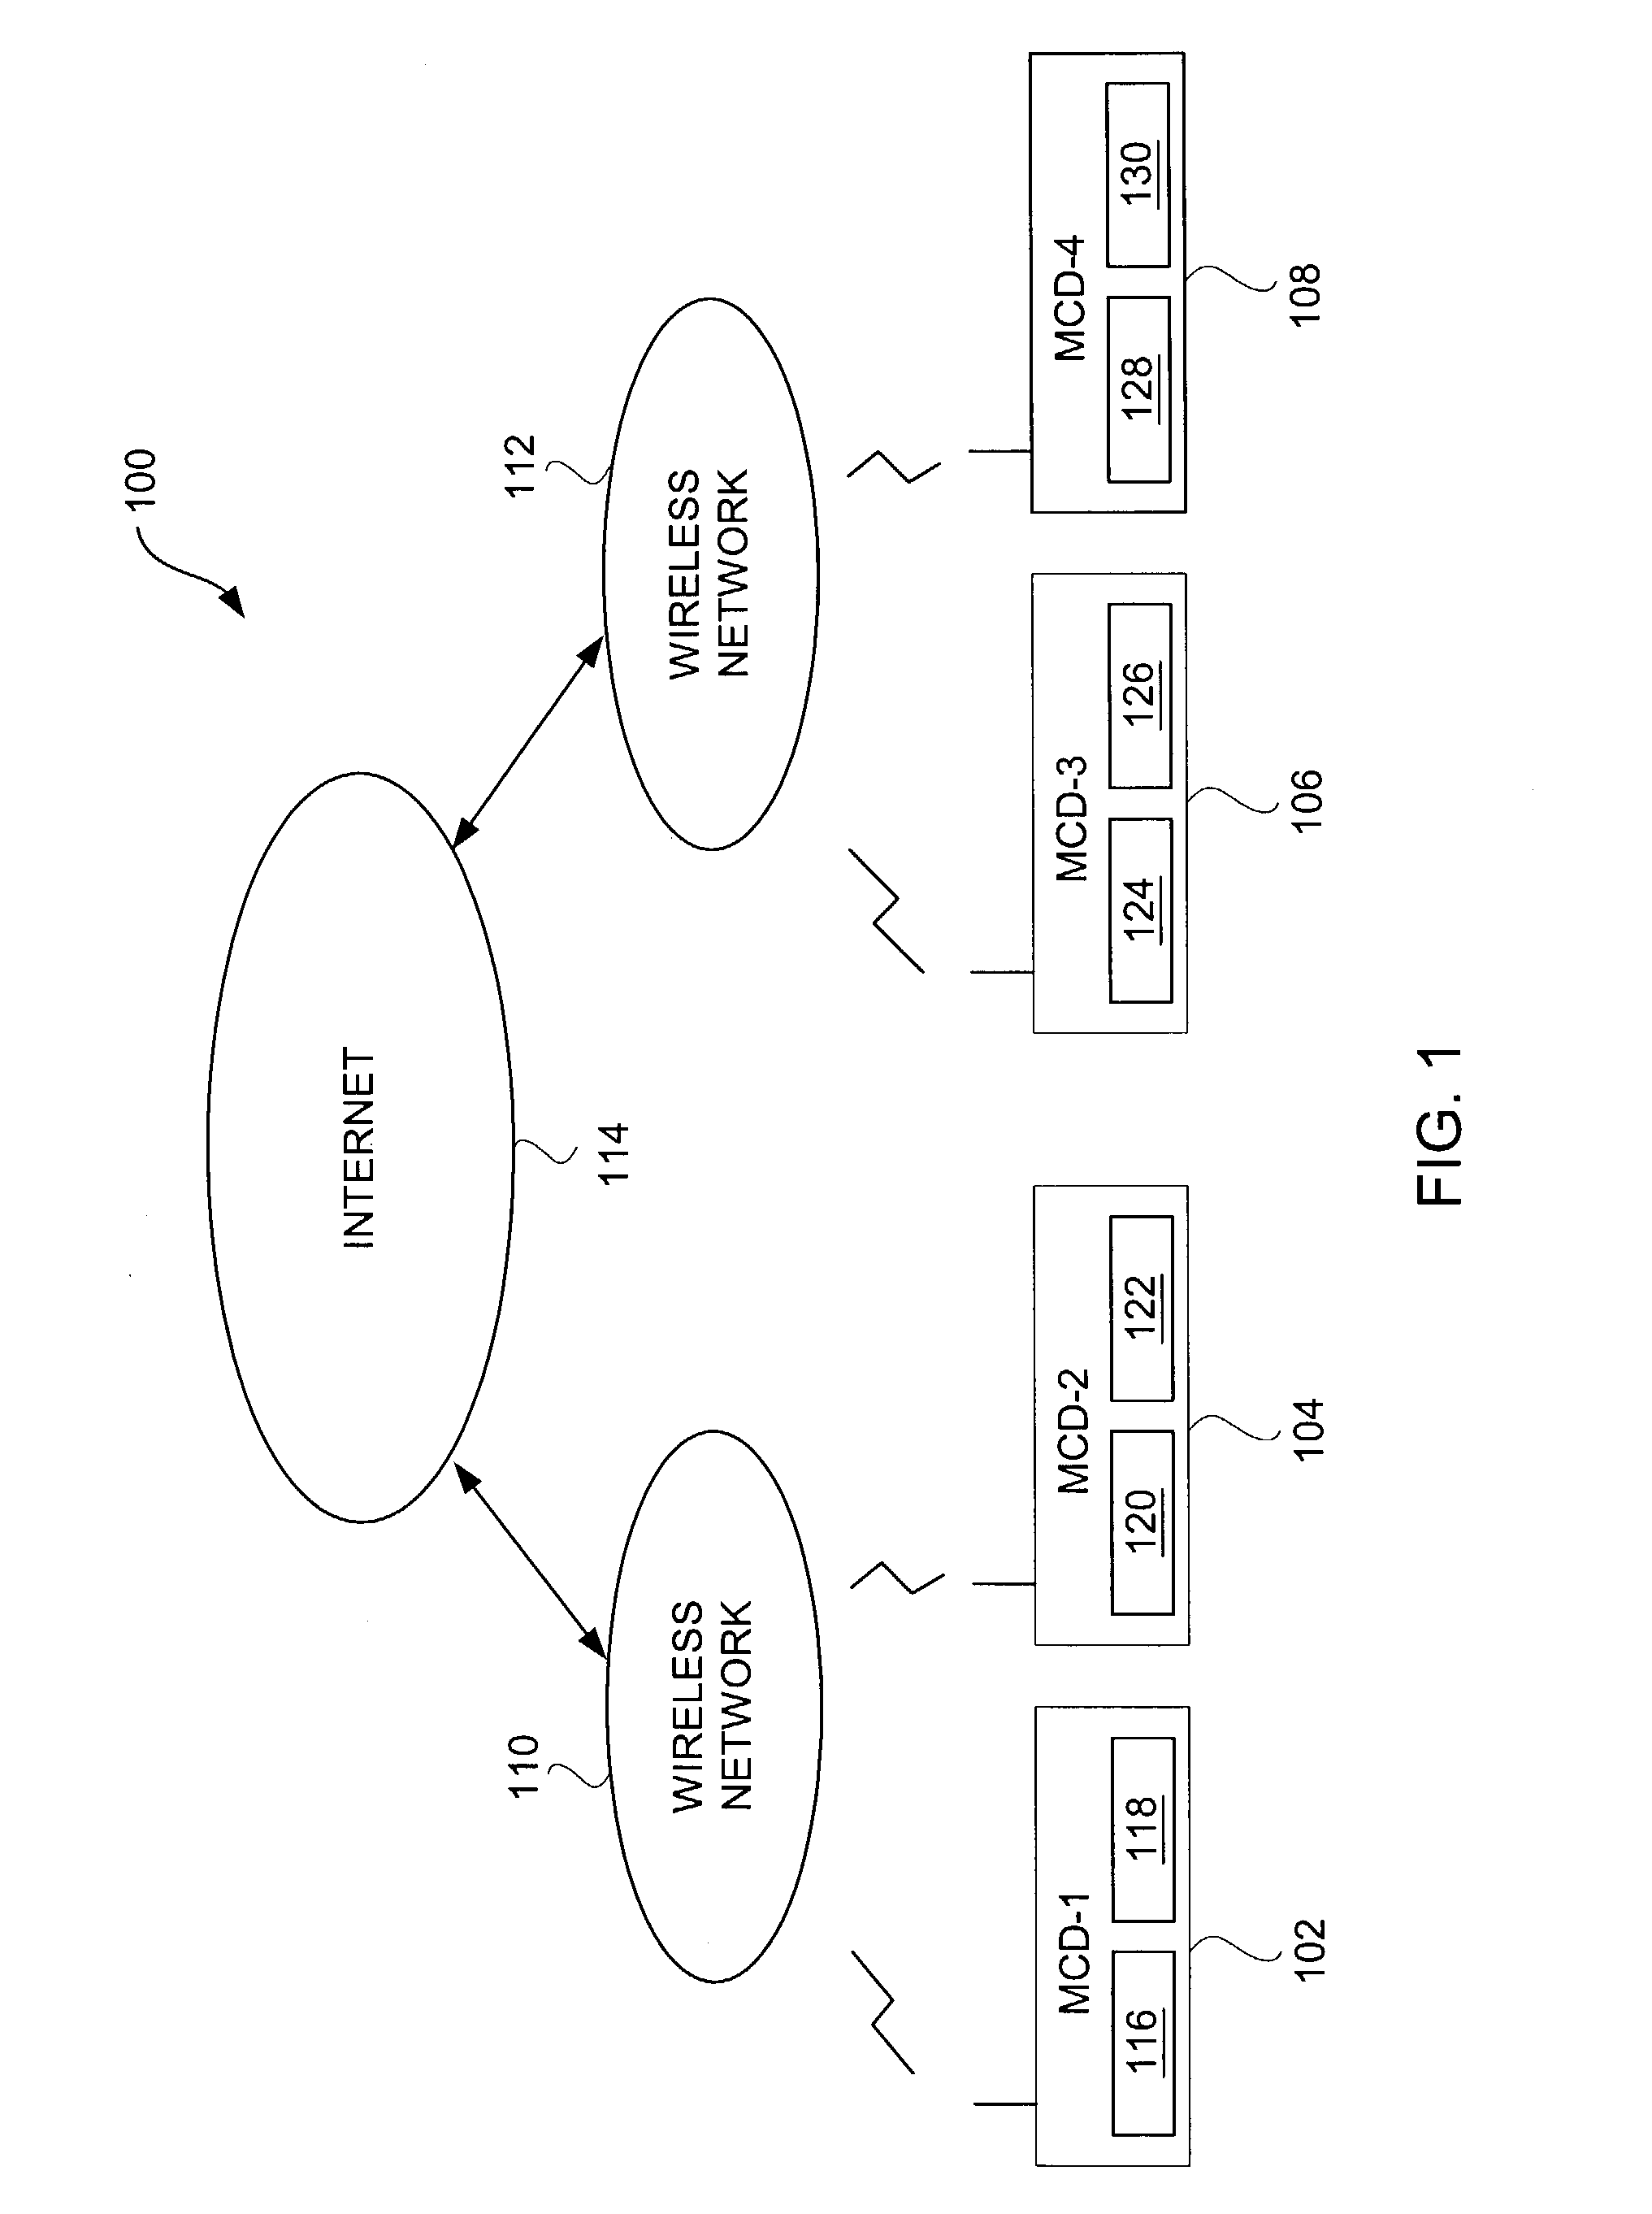 Method and system for enhanced messaging